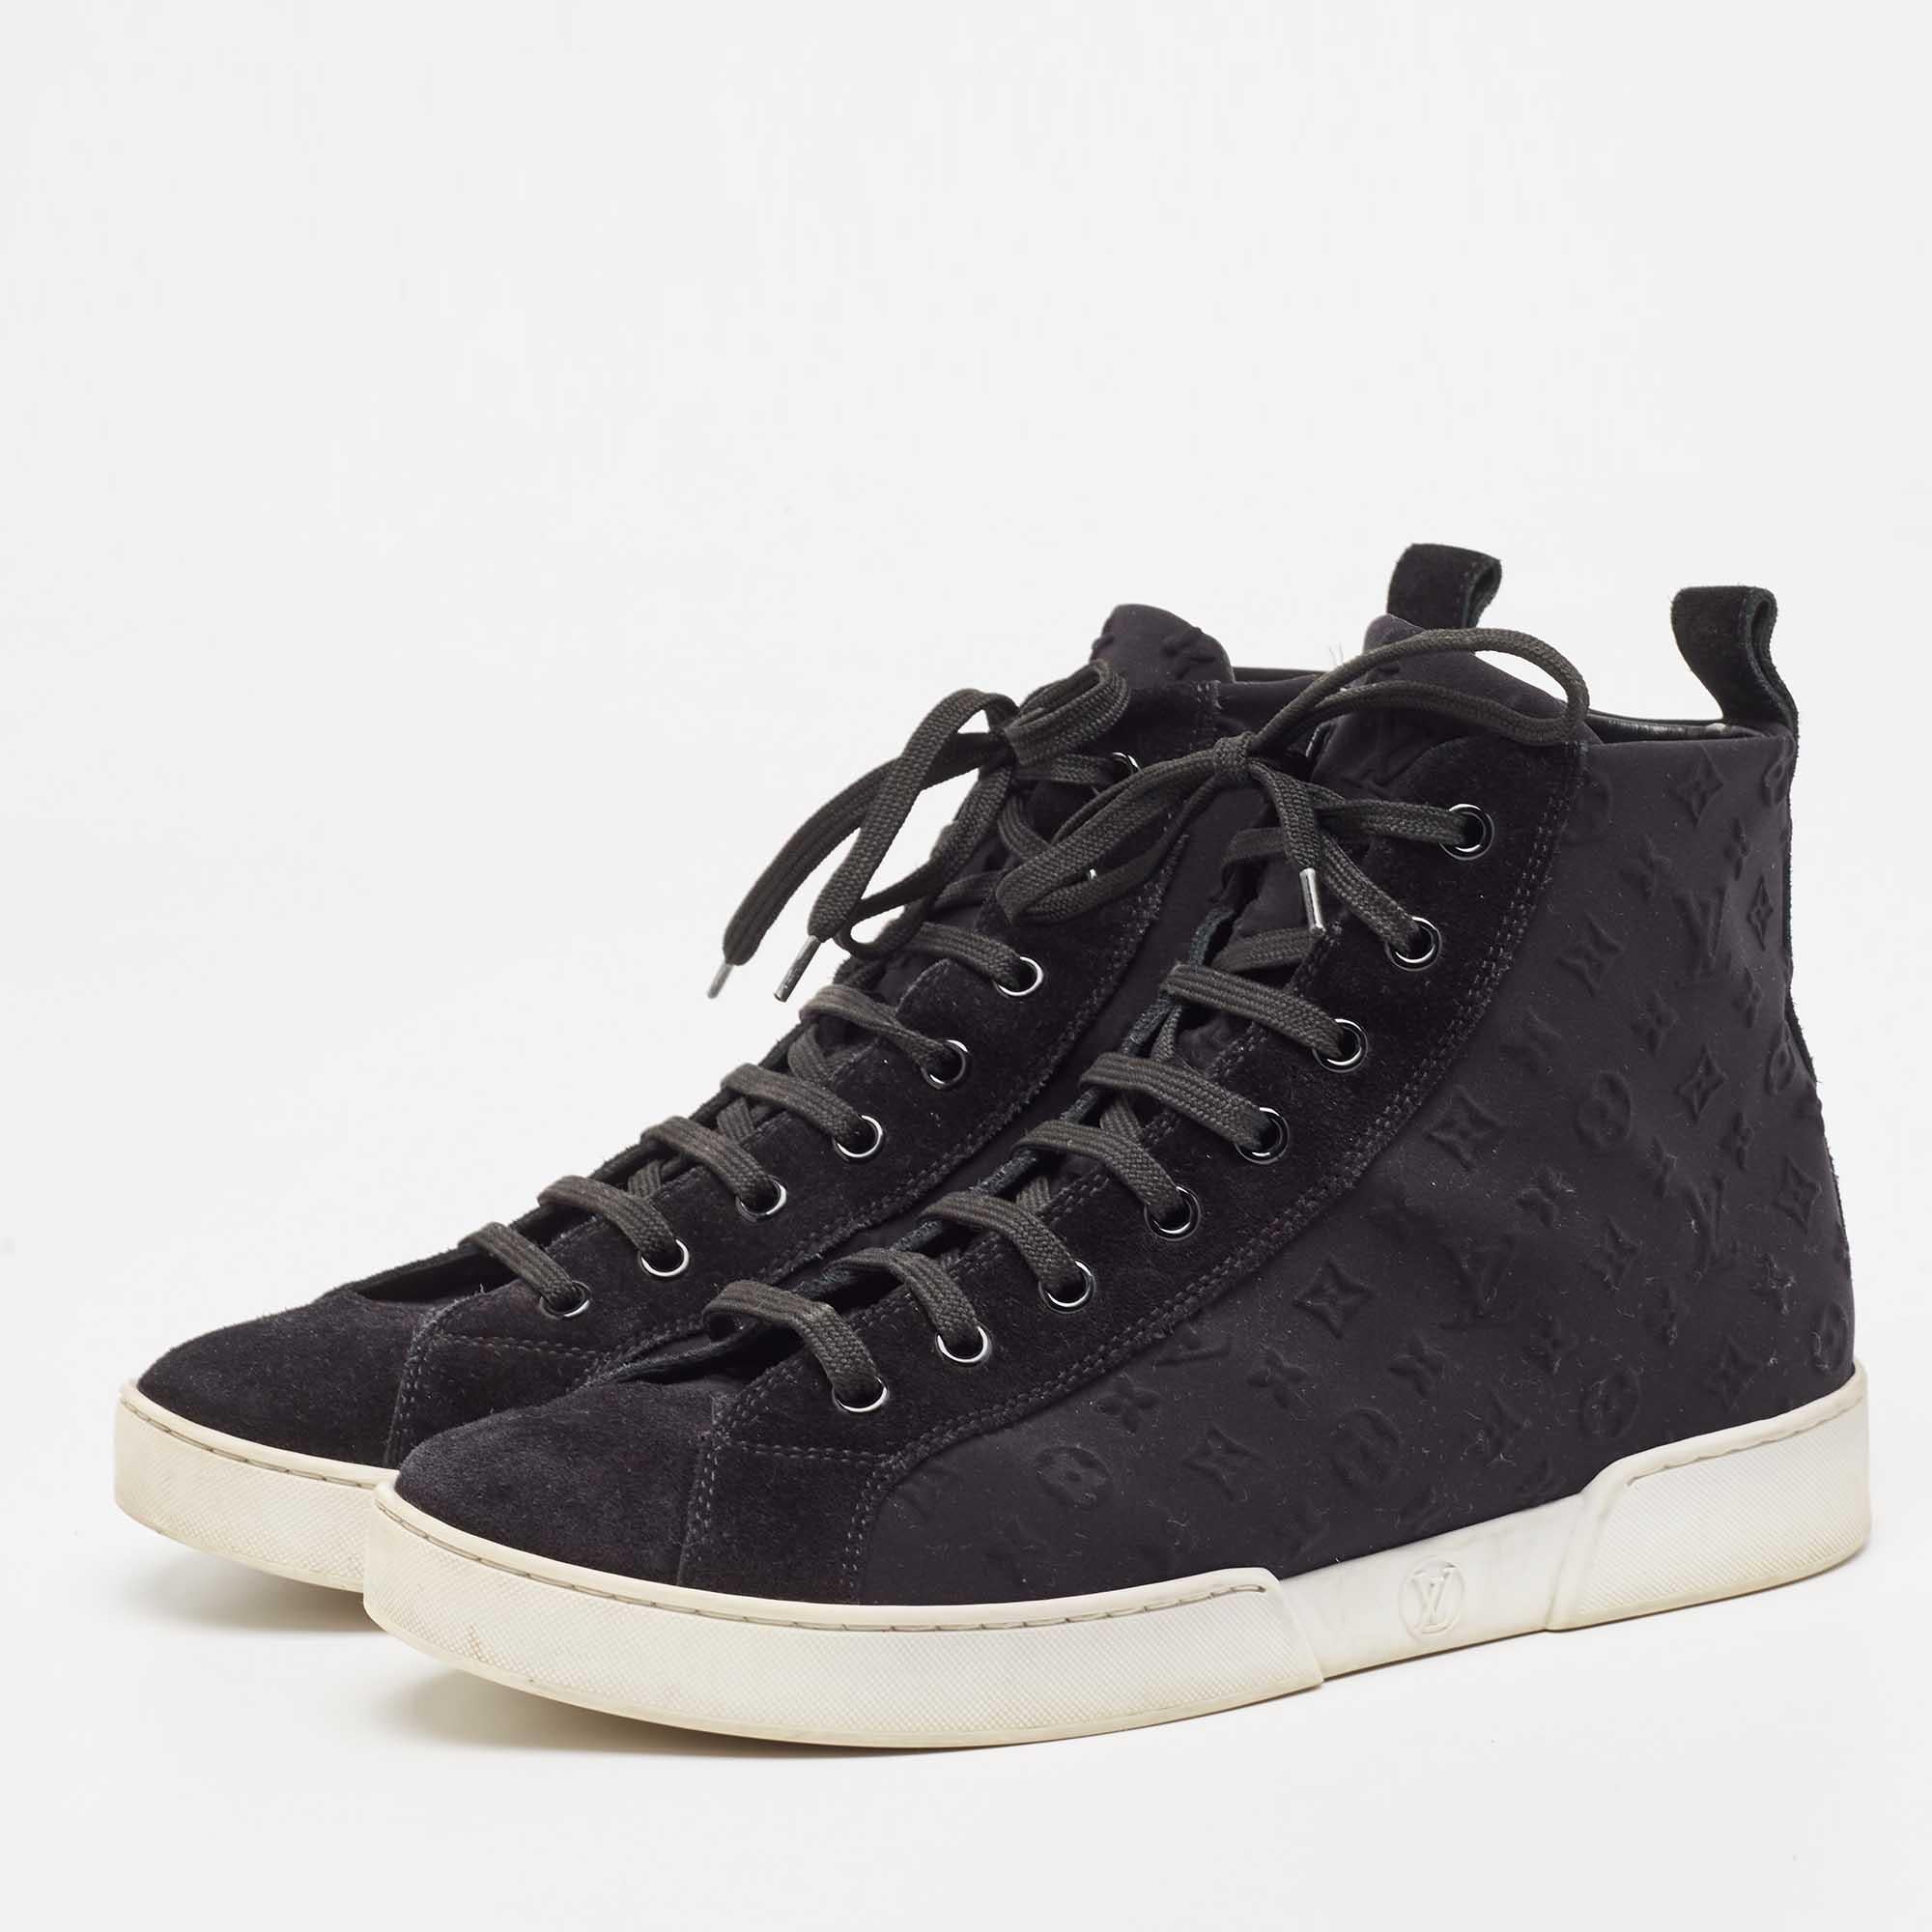 Men's Louis Vuitton Black Monogram Neoprene and Suede High Top Sneakers Size 38 For Sale